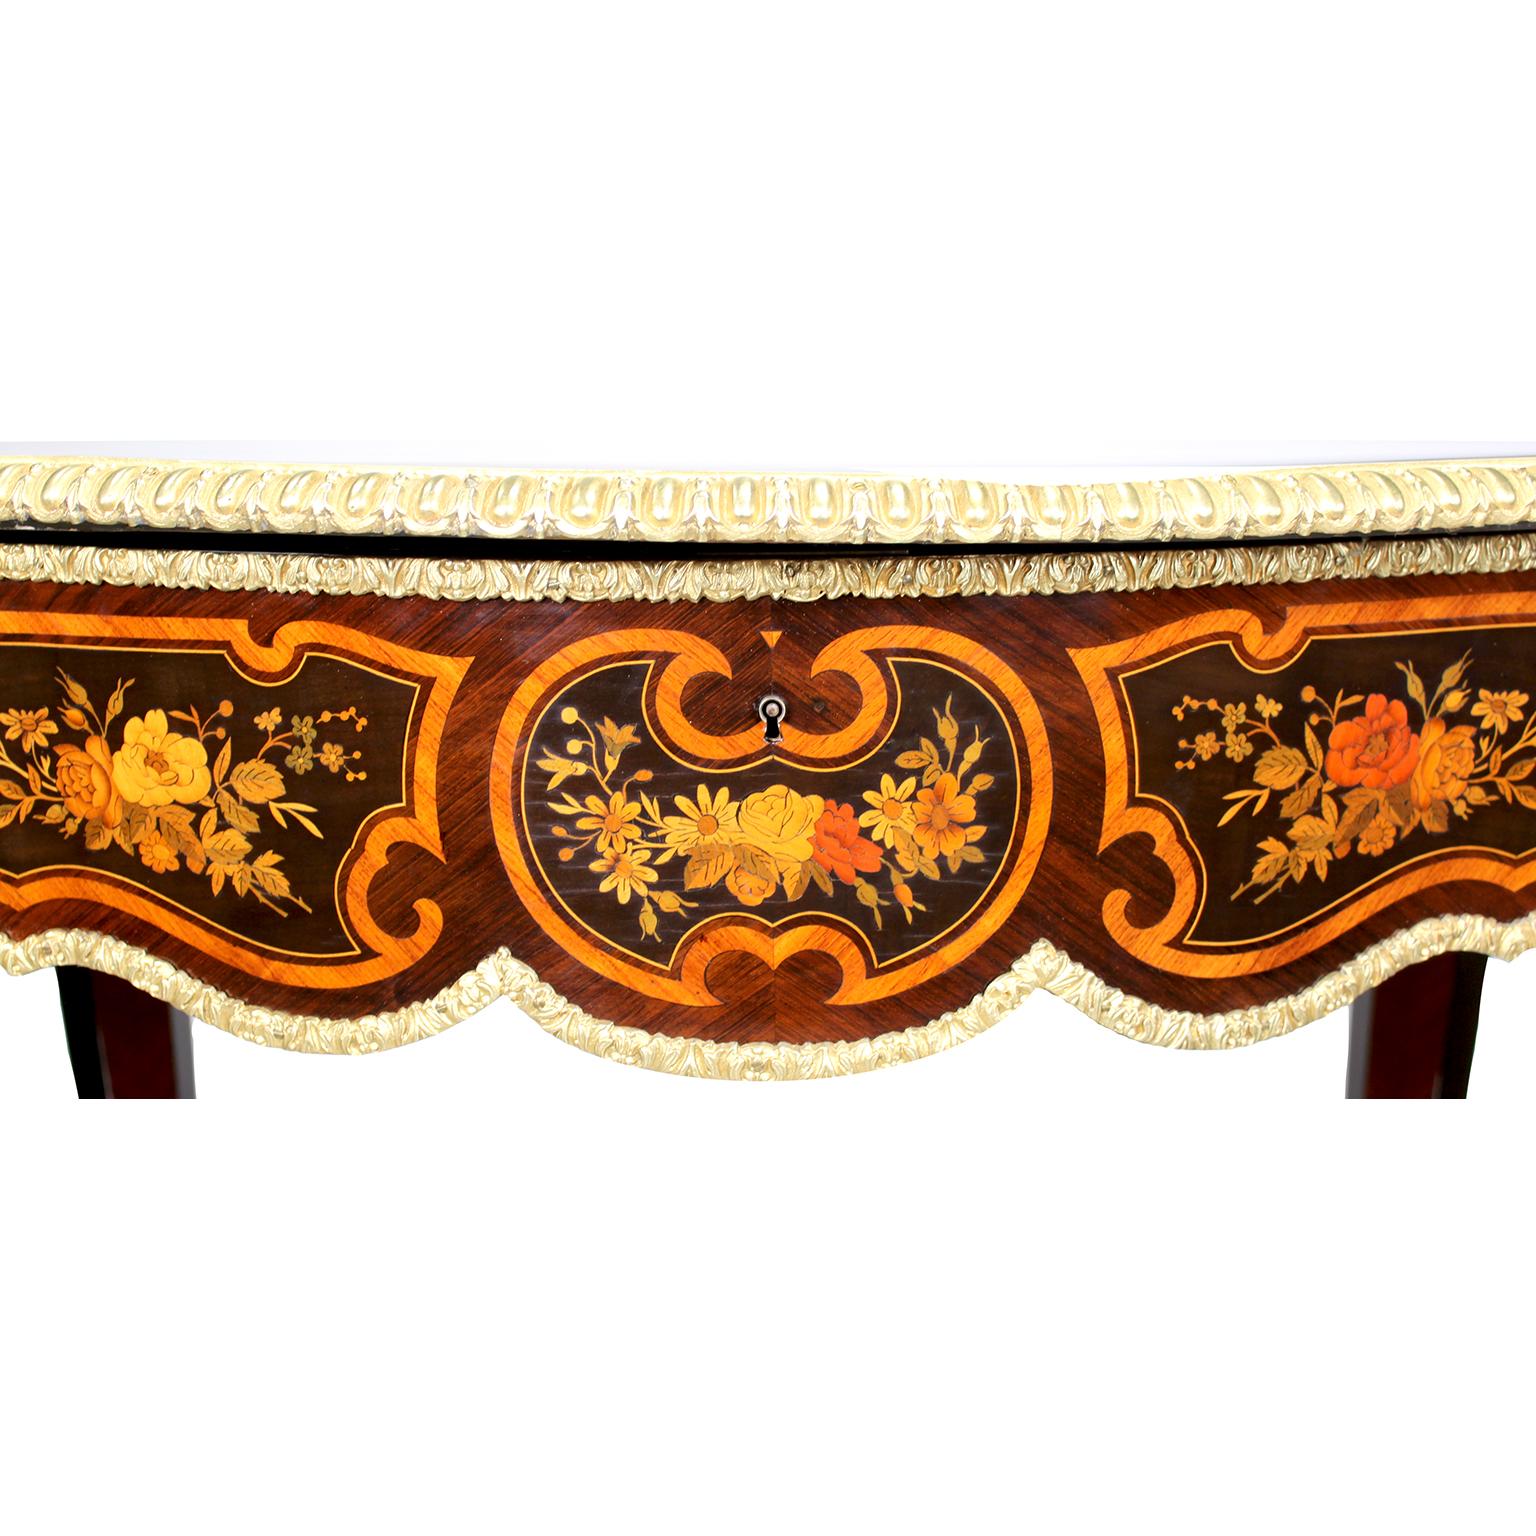 French 19th Century Louis XV Style Gilt-Bronze Mounted Marquetry Center Table For Sale 5